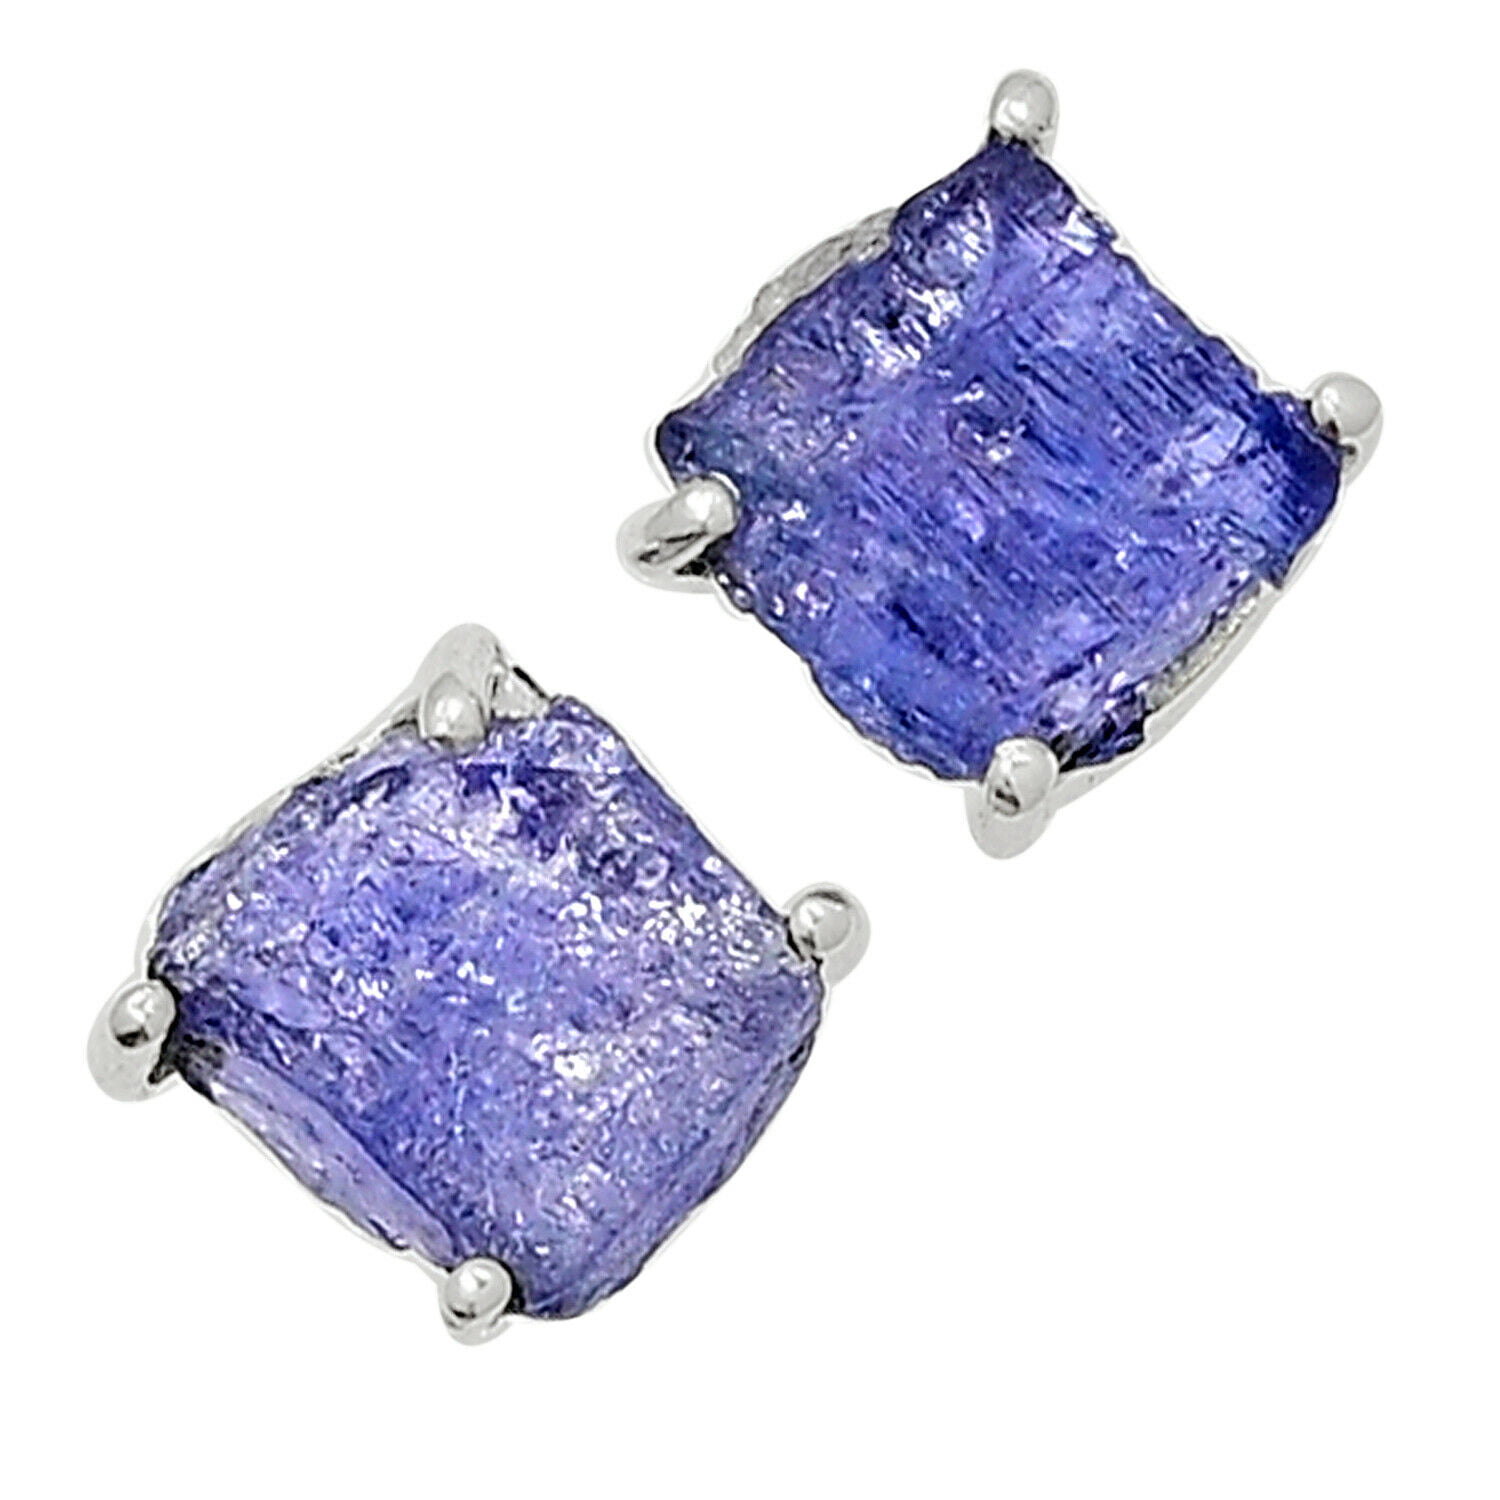 New Infinity 8mm Round Tanzanite Earrings .925 Sterling Silver 